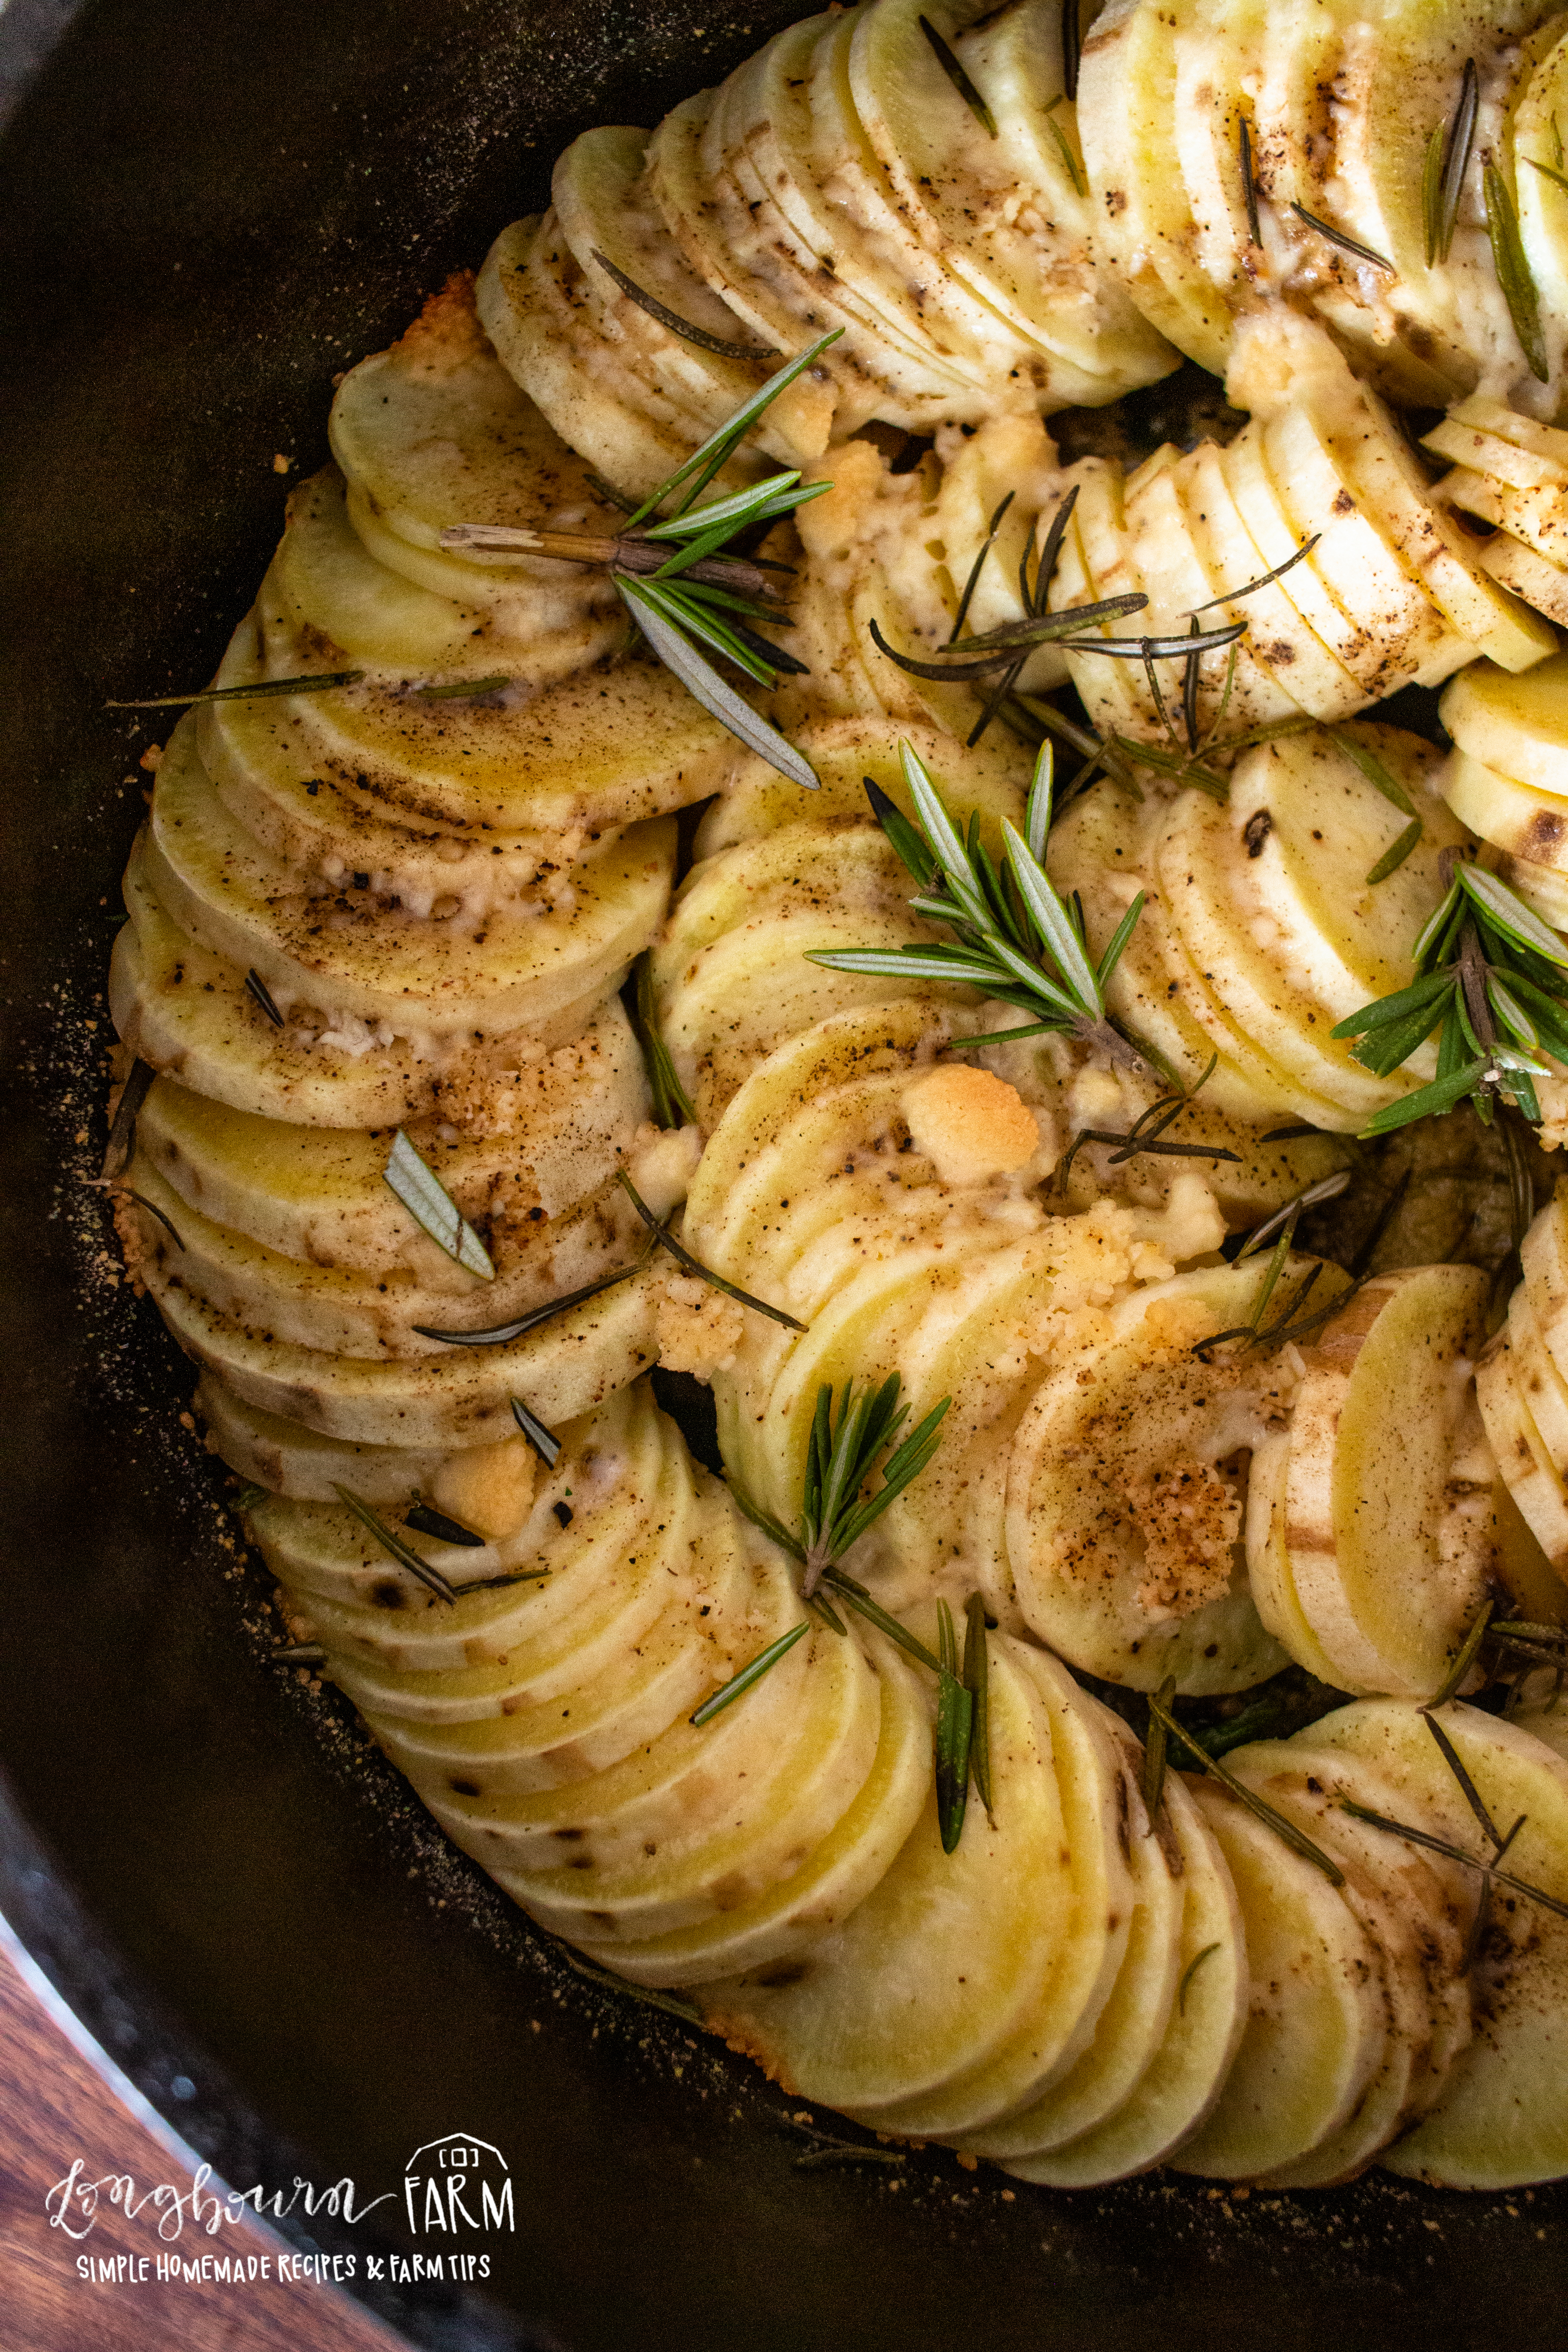 neatly arranged sliced potatoes baked and seasoned with fresh herbs and spices in a dutch oven